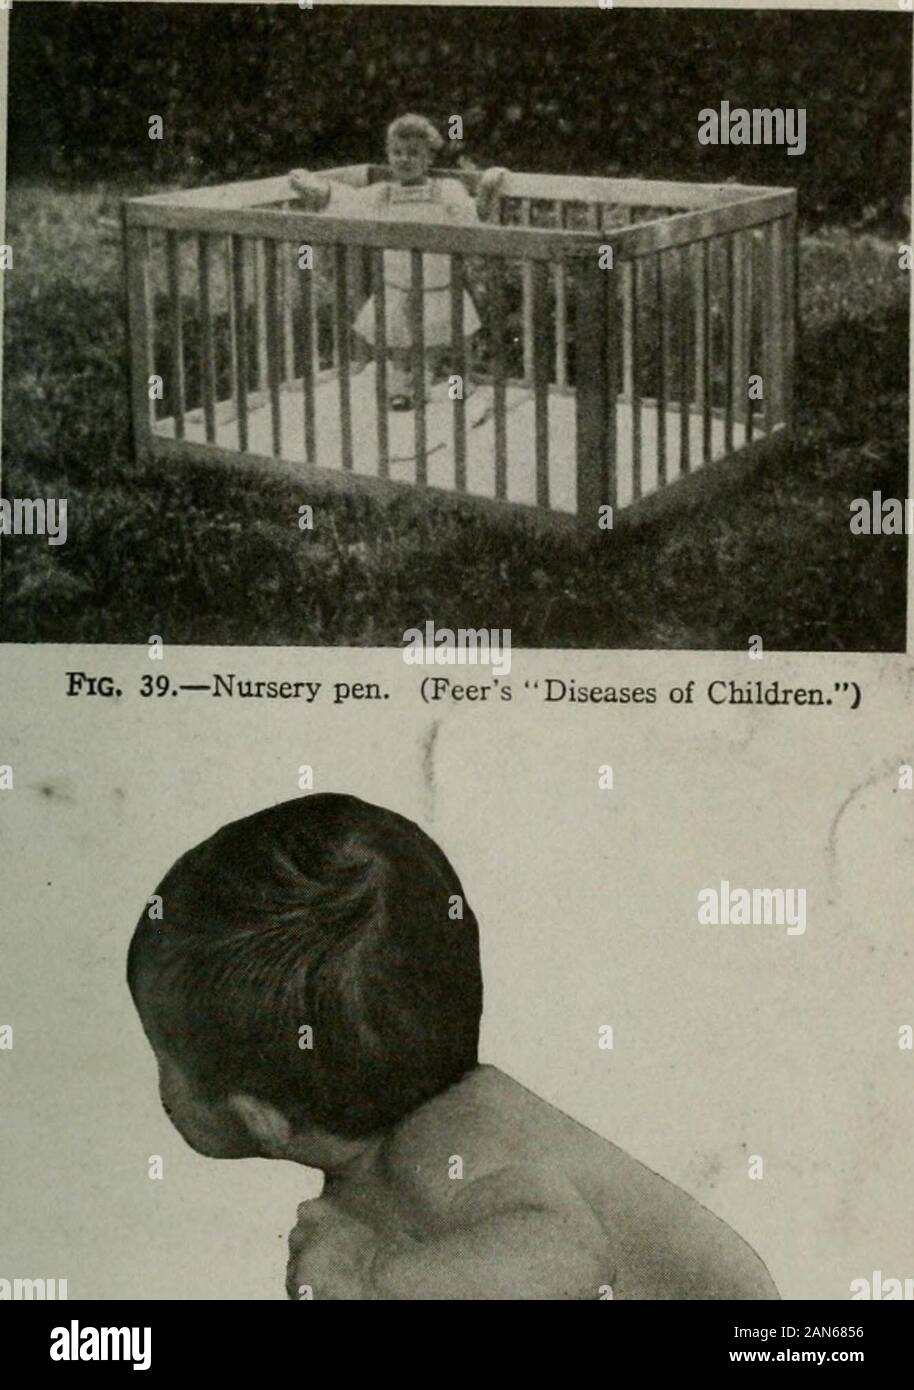 Care and feeding of infants and children; a text-book for trained nurses . Fig. 38.— At six months the baby not only lifts its head but begins raising its bodyon its arms. to make as free movements as possible. At about three or fourmonths, if a baby is placed on the stomach, it will begin holdingup its head, thus bringing into use the muscles in the neck andback (Fig. 38). At five or six months, the baby not only liftsits head but begins raising its body on its anus and also makingattempts to bring into use the muscles of the thighs, so that bythe eighth or ninth month it begins to raise itse Stock Photo